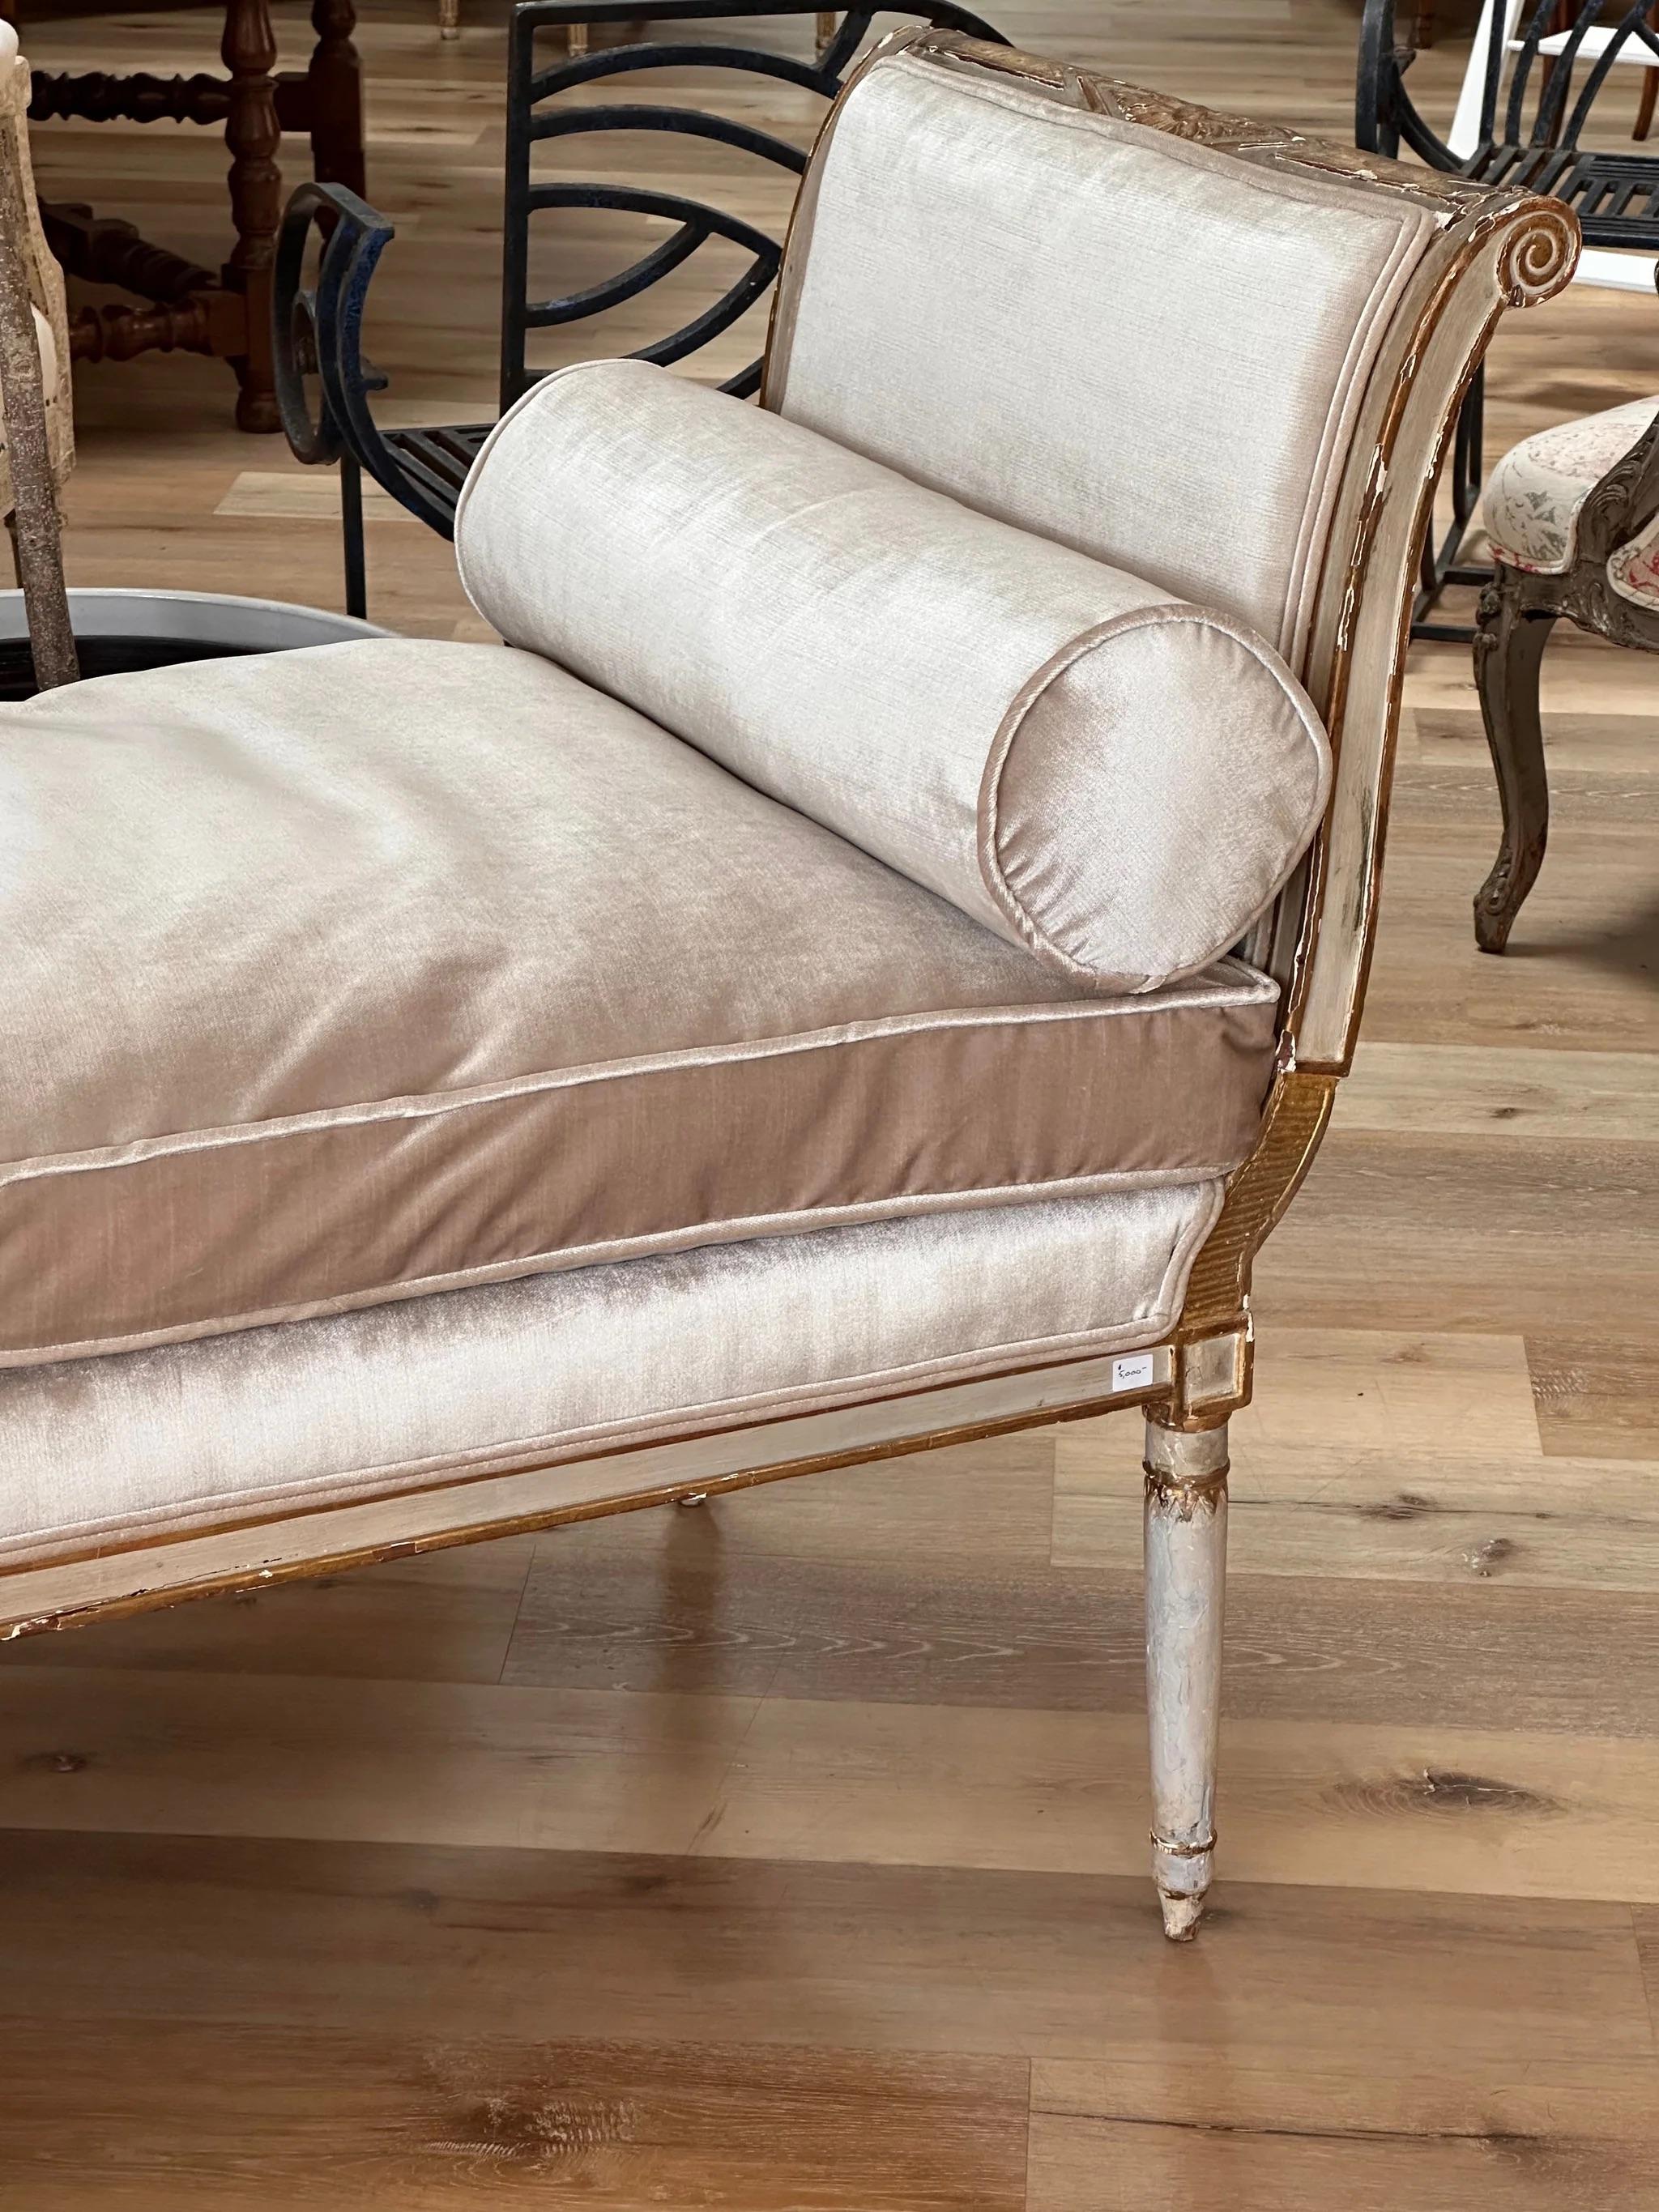 Louis XV style daybed, French, early 19th Century, the gently curved ends having gilt carving and gilt carving supported by cylindrical slightly tapered legs, in a distressed cream polychrome, newly upholstered in velvet.  Having extra pillows so it